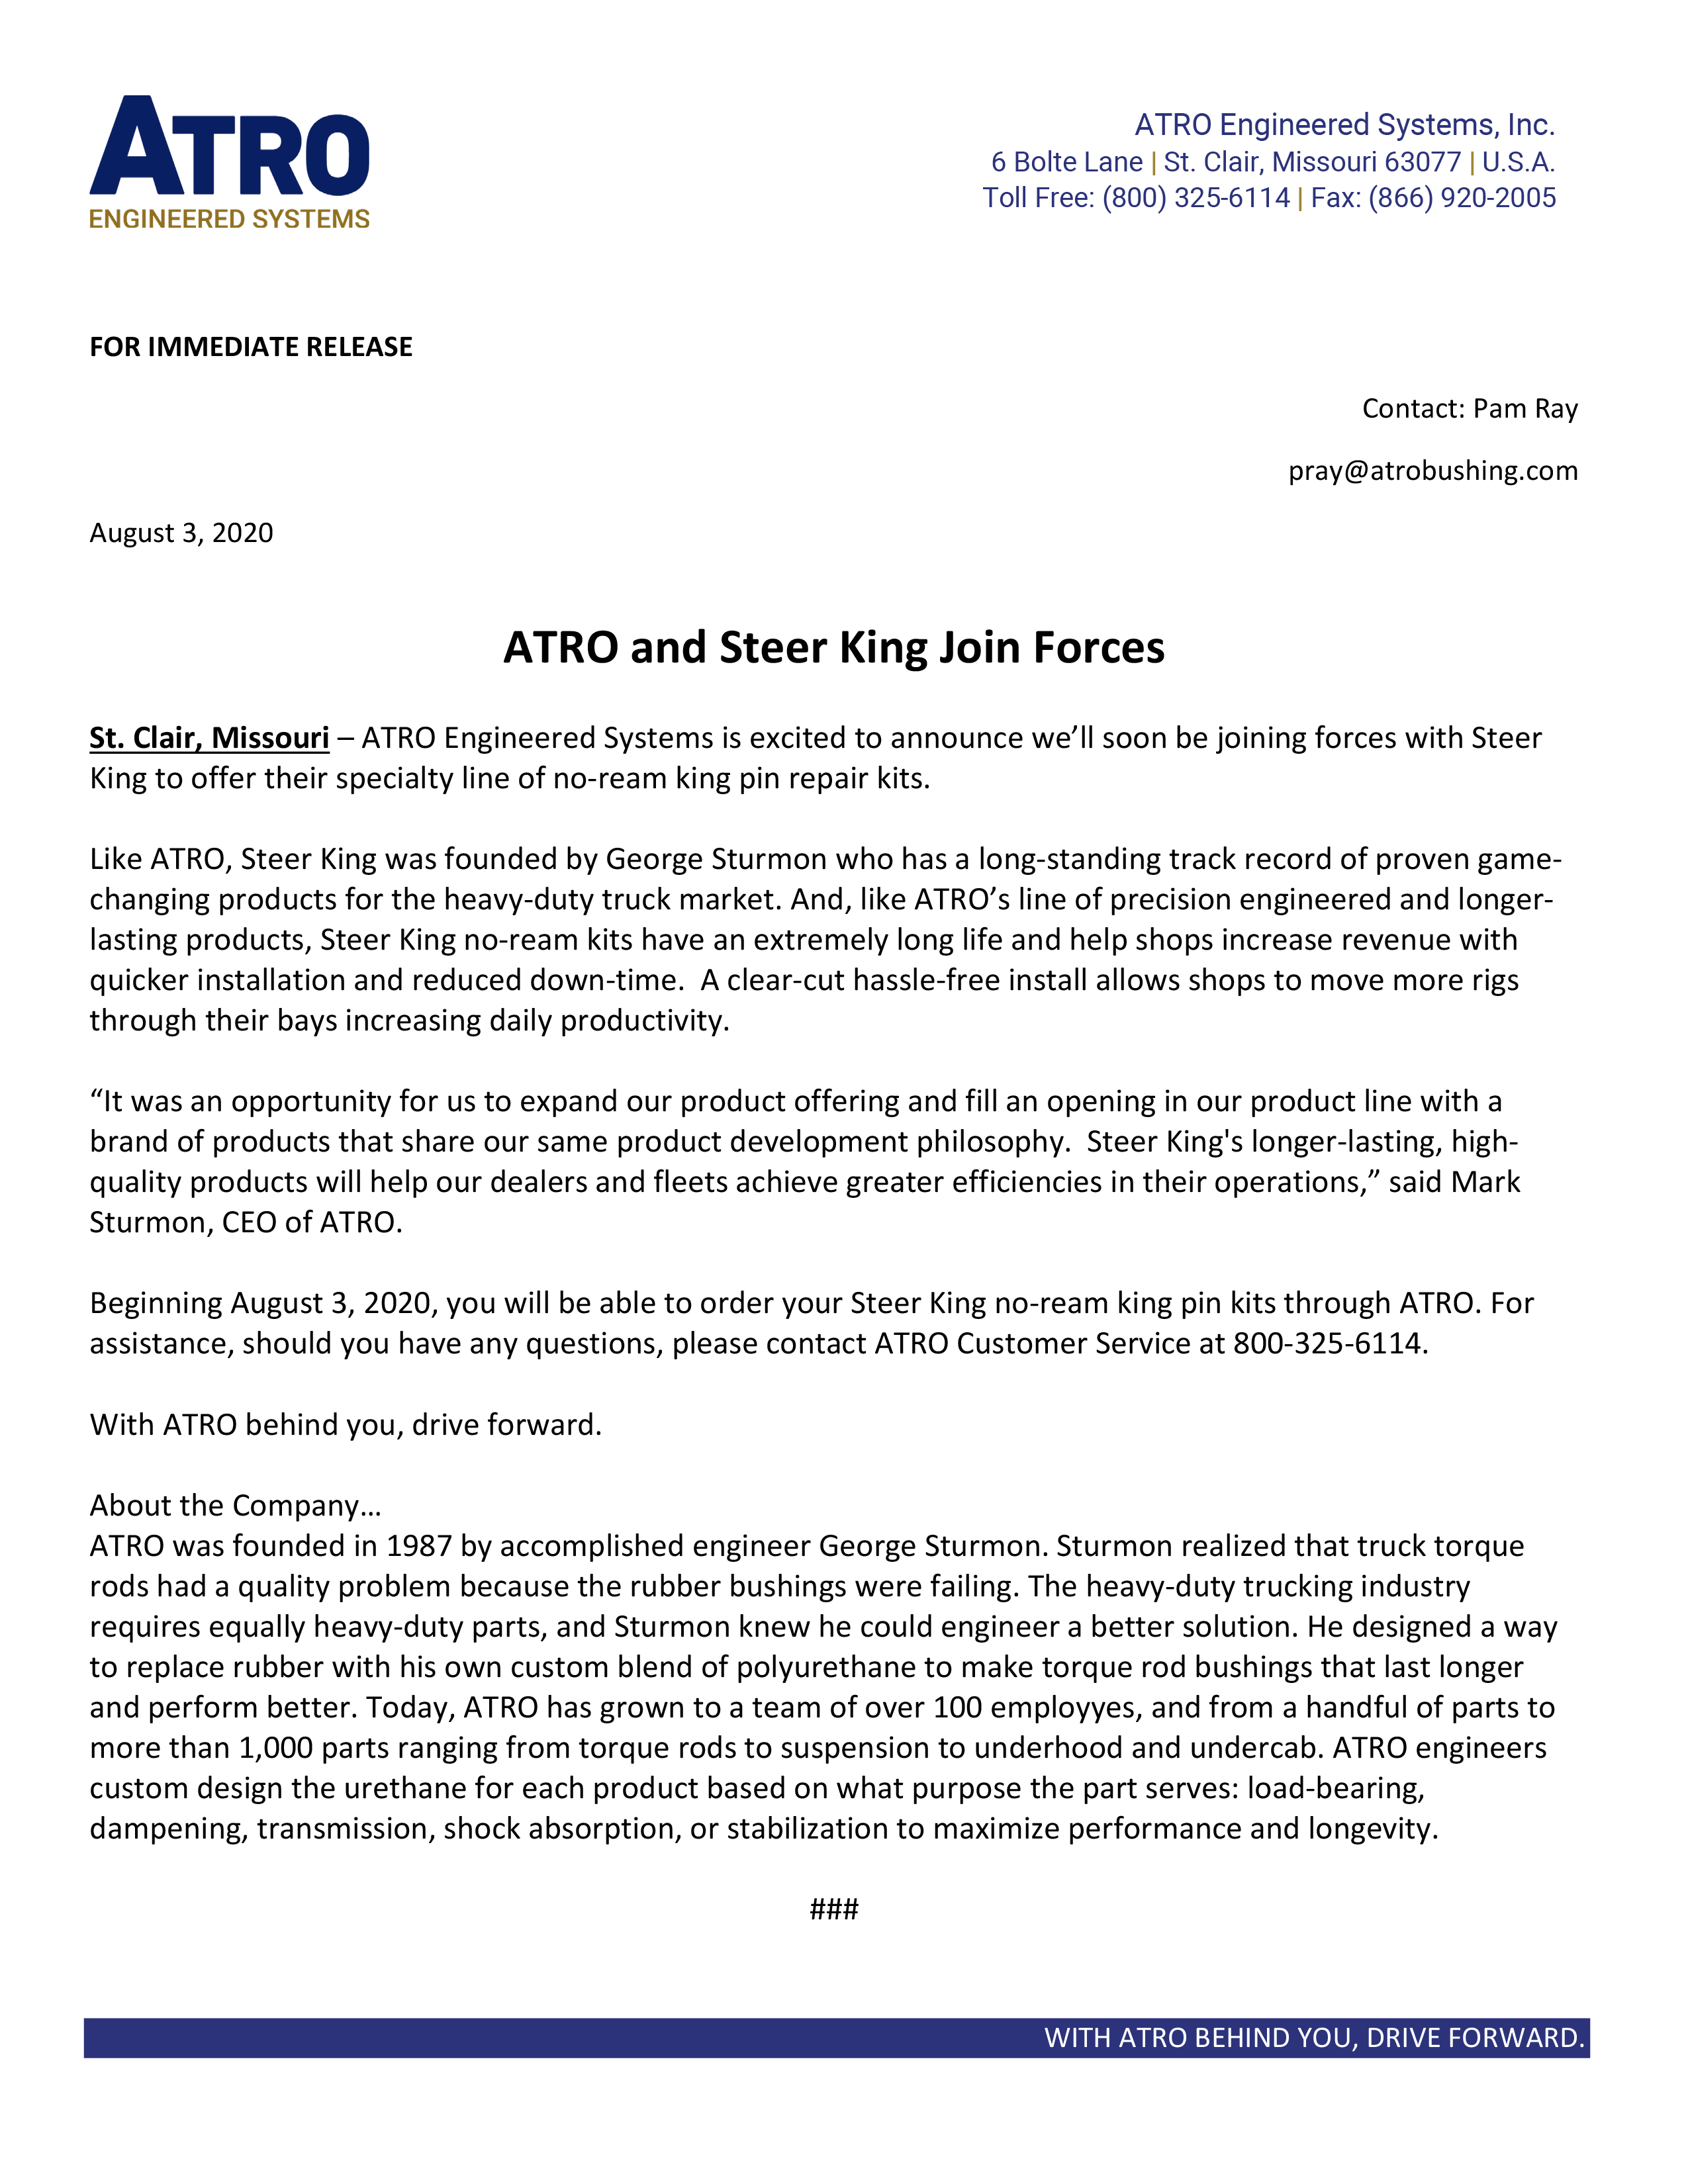 ATRO and Steer King Join Forces - Press Release August 3, 2020